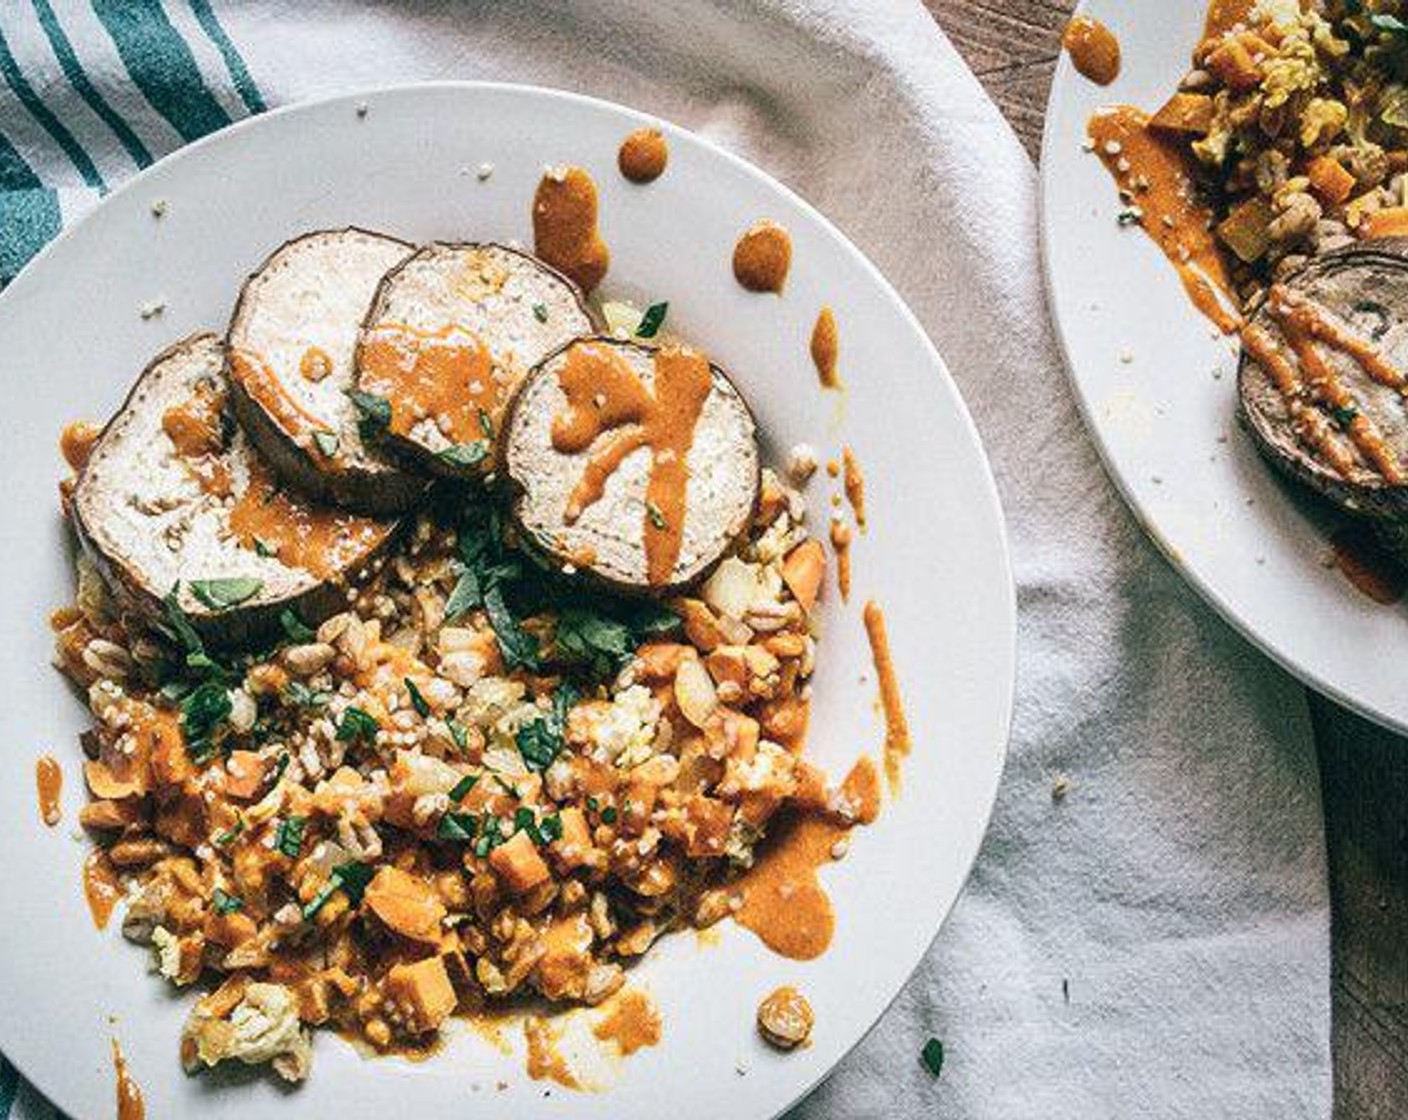 Asian Fried Farro with Roasted Eggplant